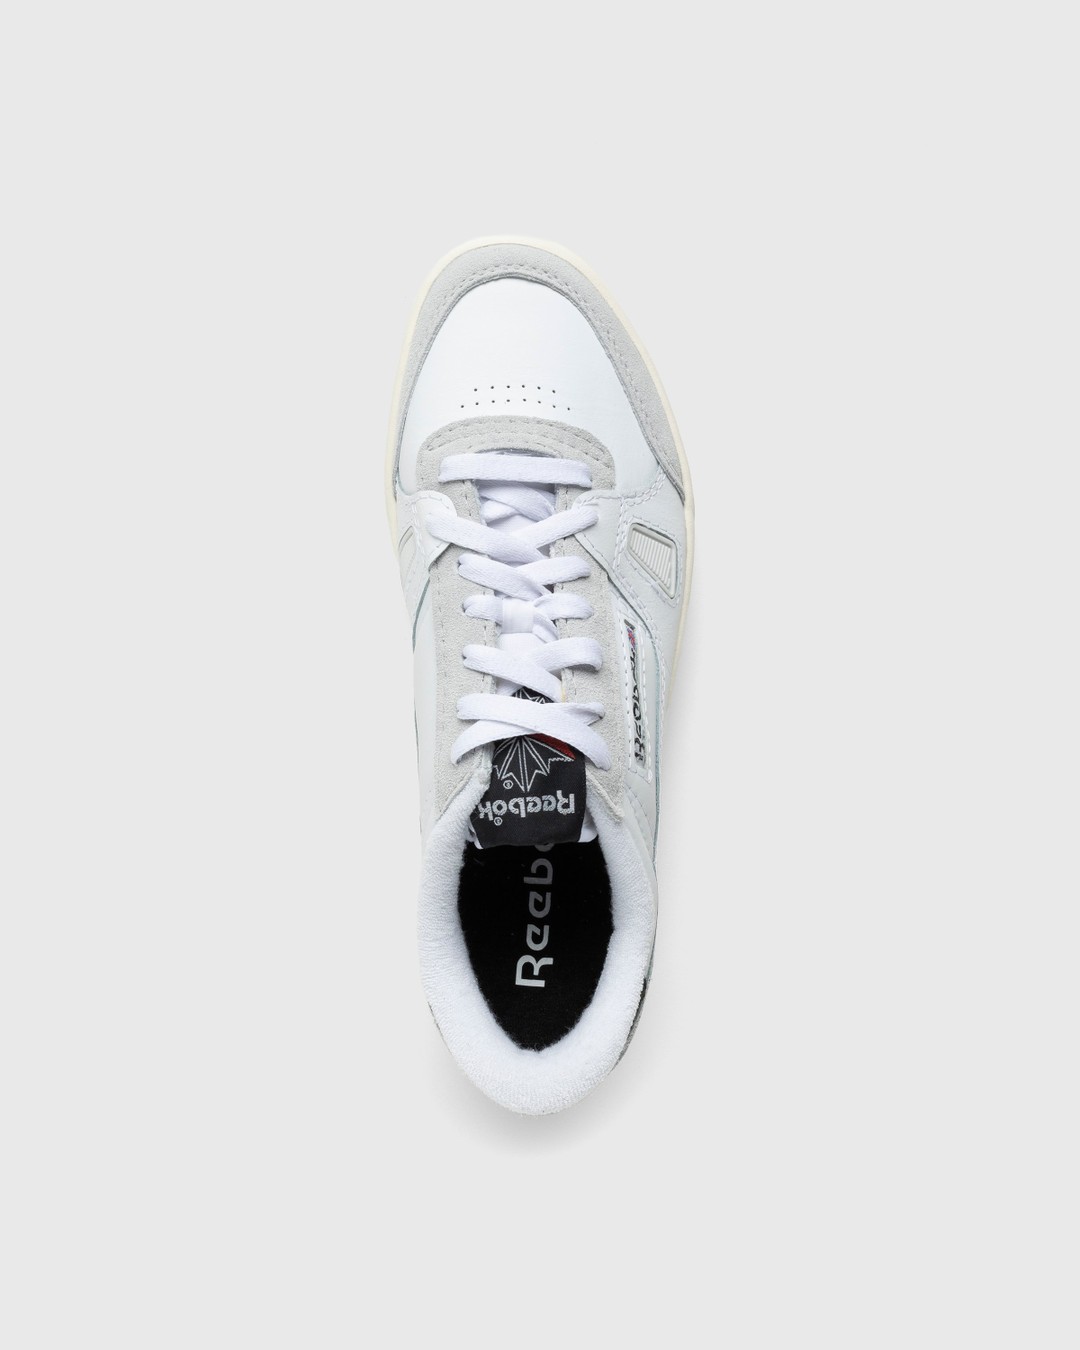 Reebok – LT Court - Low Top Sneakers - White - Image 5